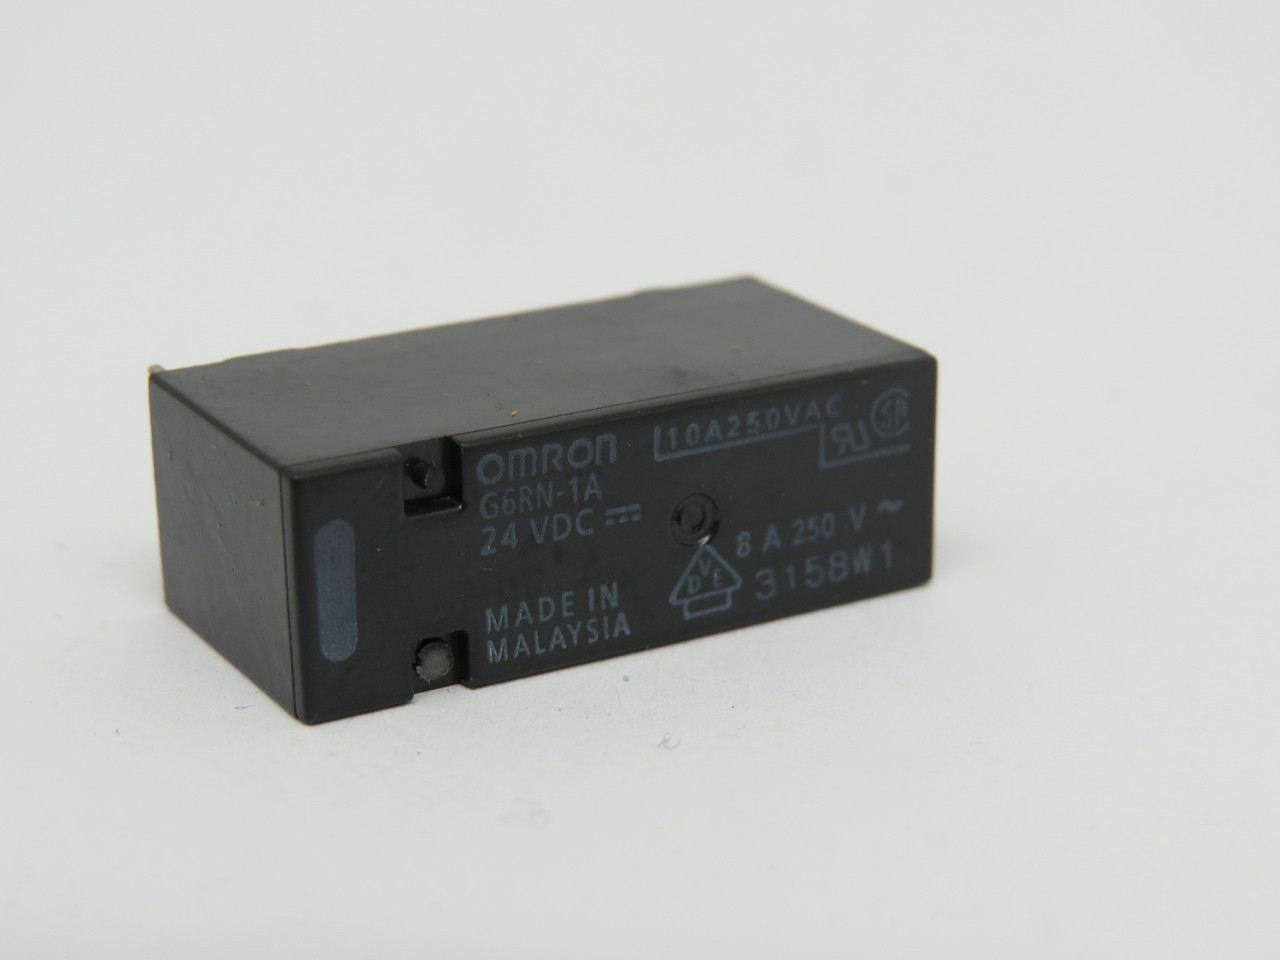 Omron G6RN-1A24VDC Relay 24VDC 8A 250V 4-Pin USED